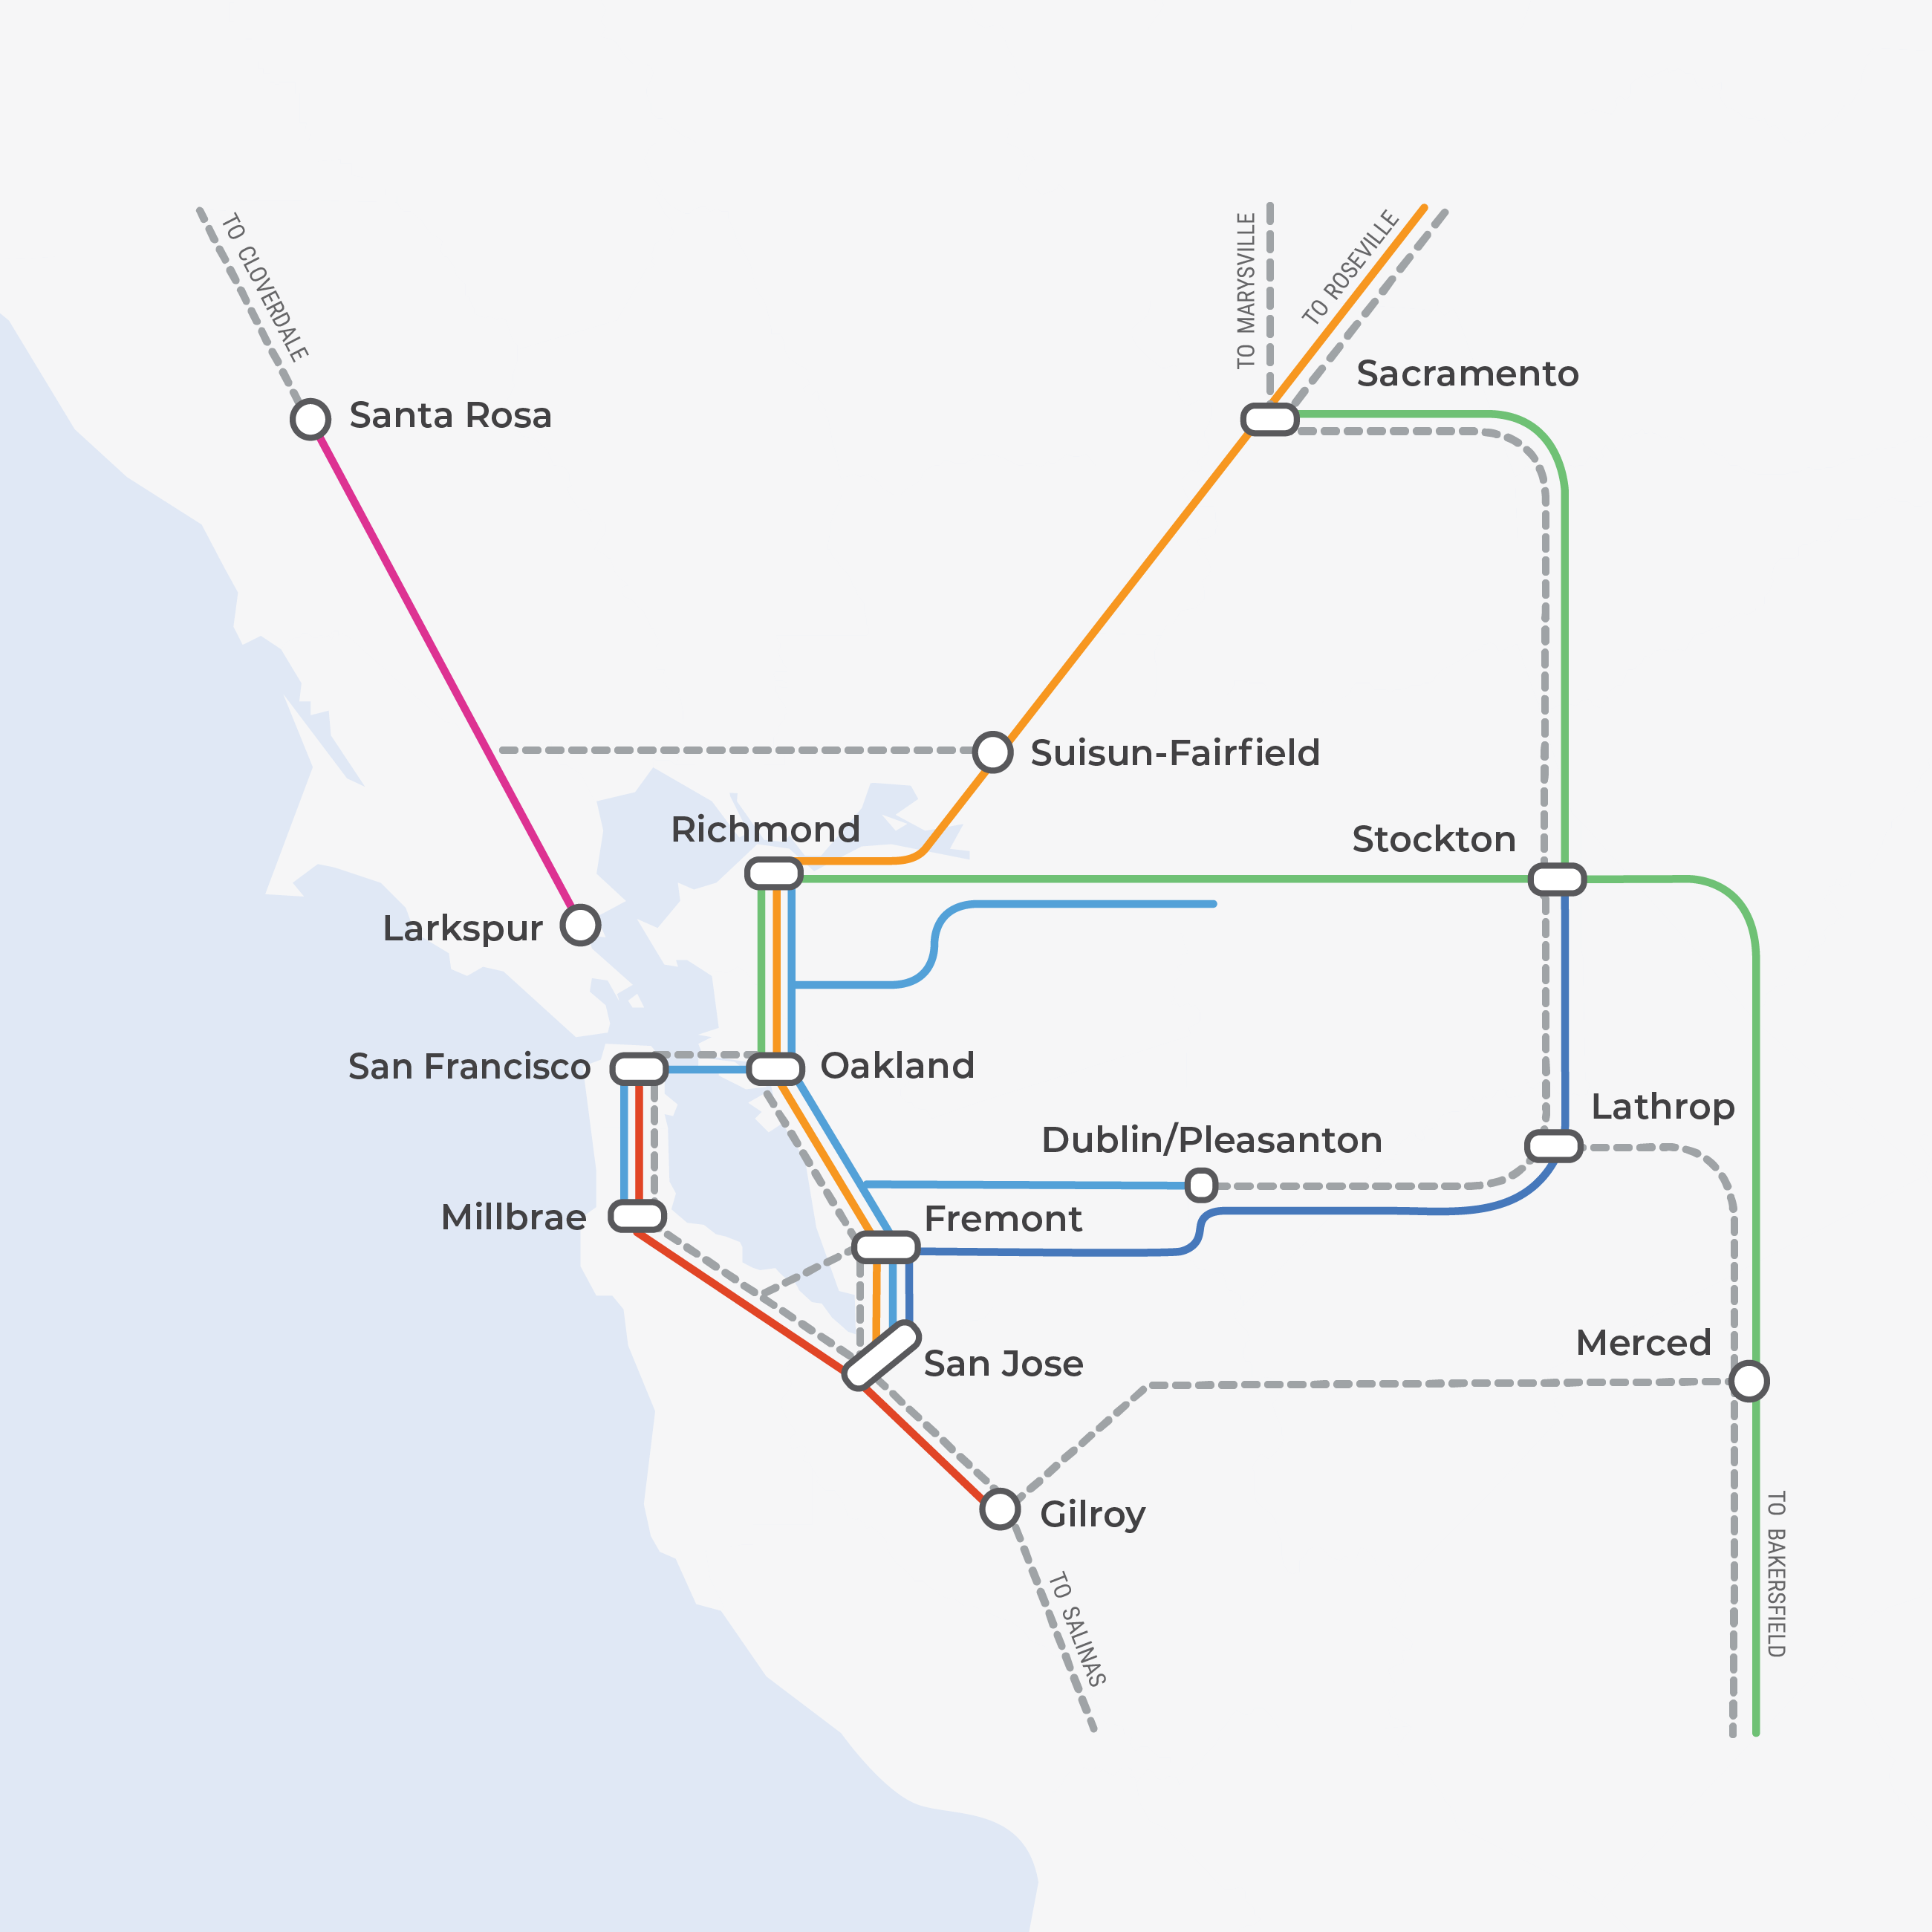 Map of the Northern California Megaregion